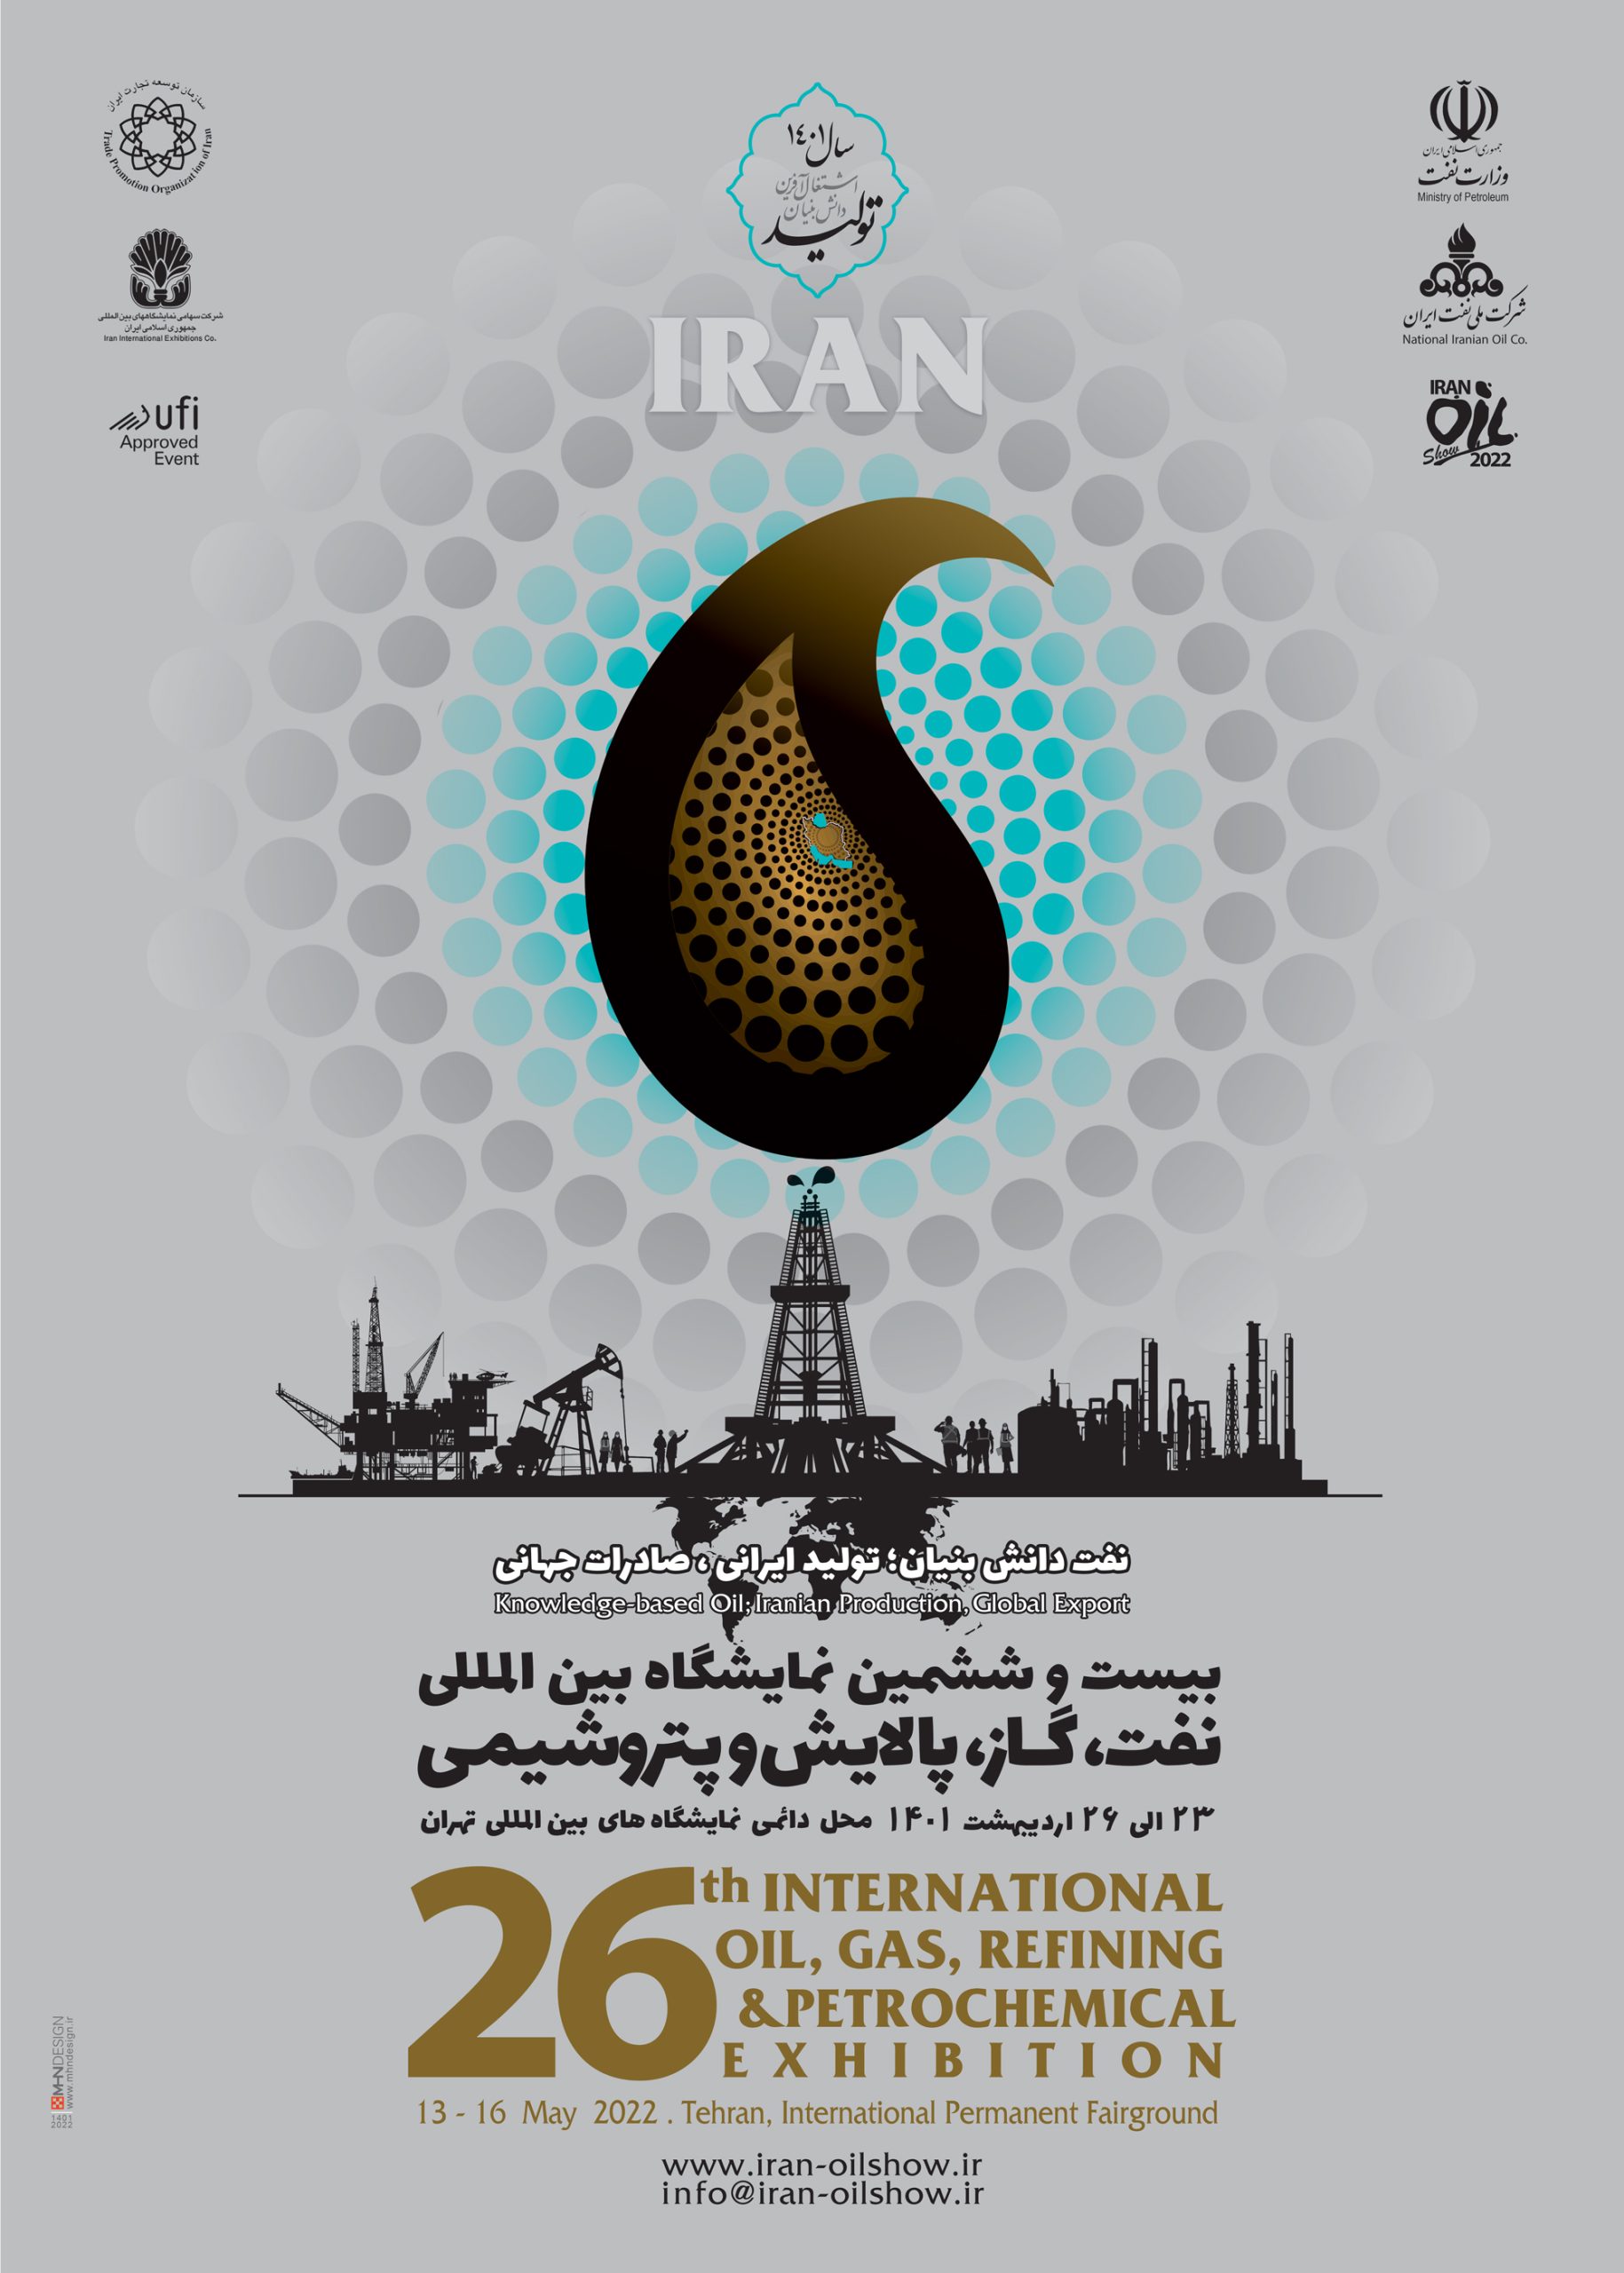 13<sup>th</sup> – 16<sup>th</sup> May 2022:<br>The 26<sup>th</sup> IRAN International Oil, Gas, Refining & Petrochemical Exhibition